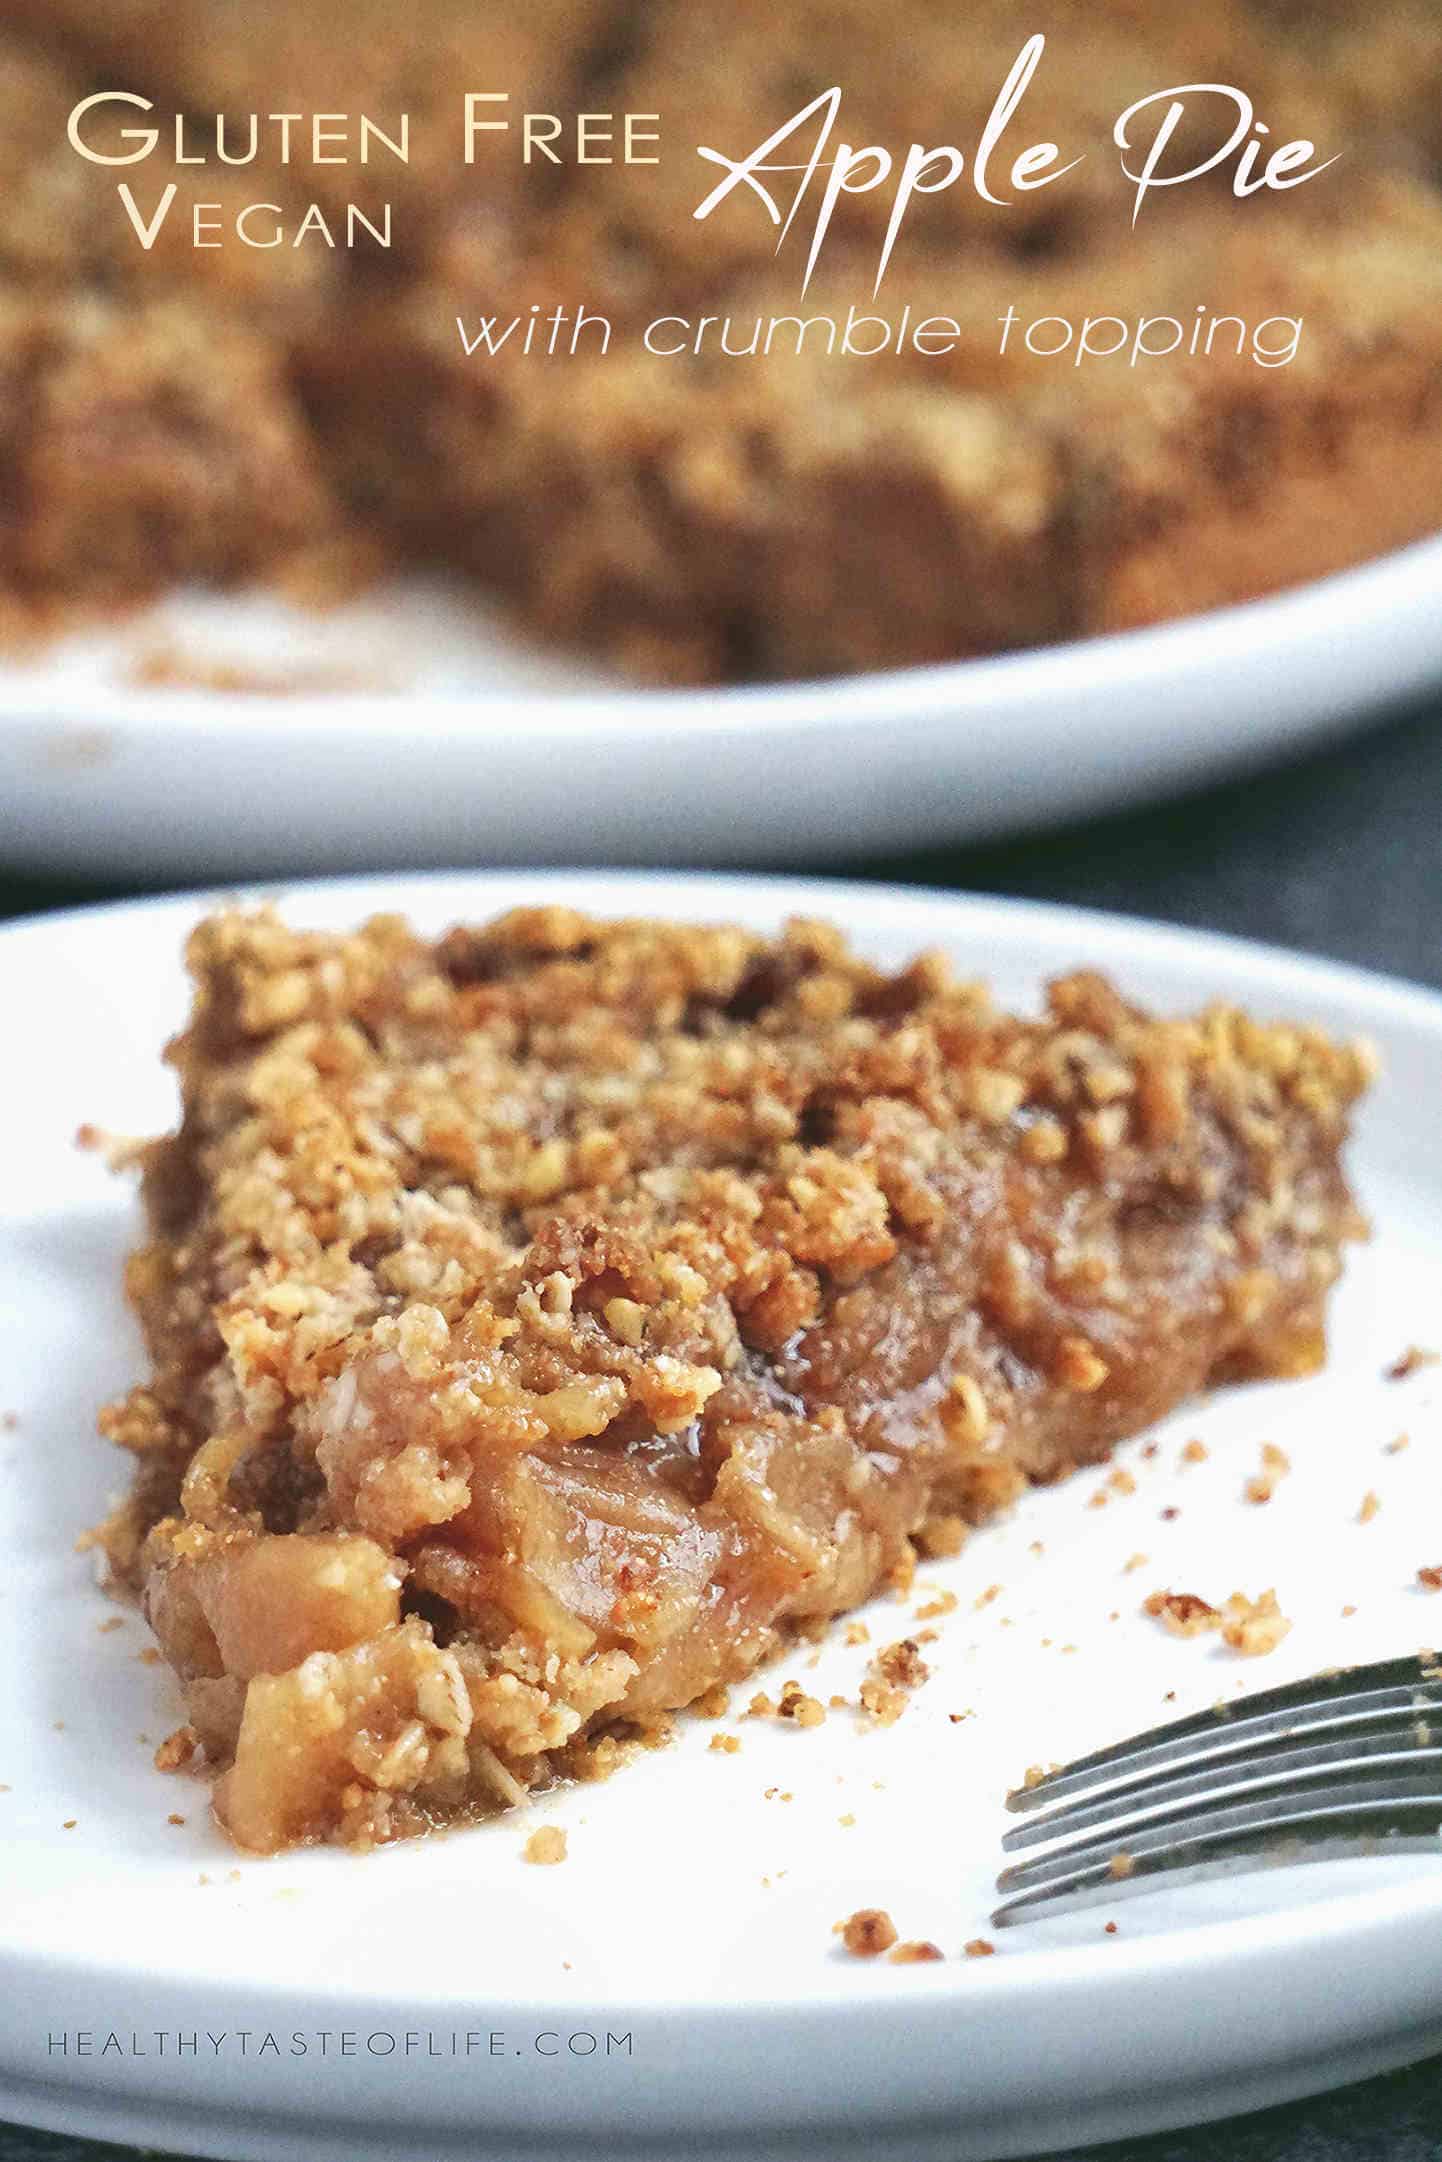 Vegan Gluten Free Dutch Apple Pie Recipe – a healthy traditional dessert for holidays made with a gluten free crust (oatmeal flour, cassava and sorghum flour), sweet apple filling and topped it with a delicious layer of crumb topping (the oats and the walnuts add extra texture). The best Healthy Gluten Free Dutch Apple Pie, that you can easily make yourself!